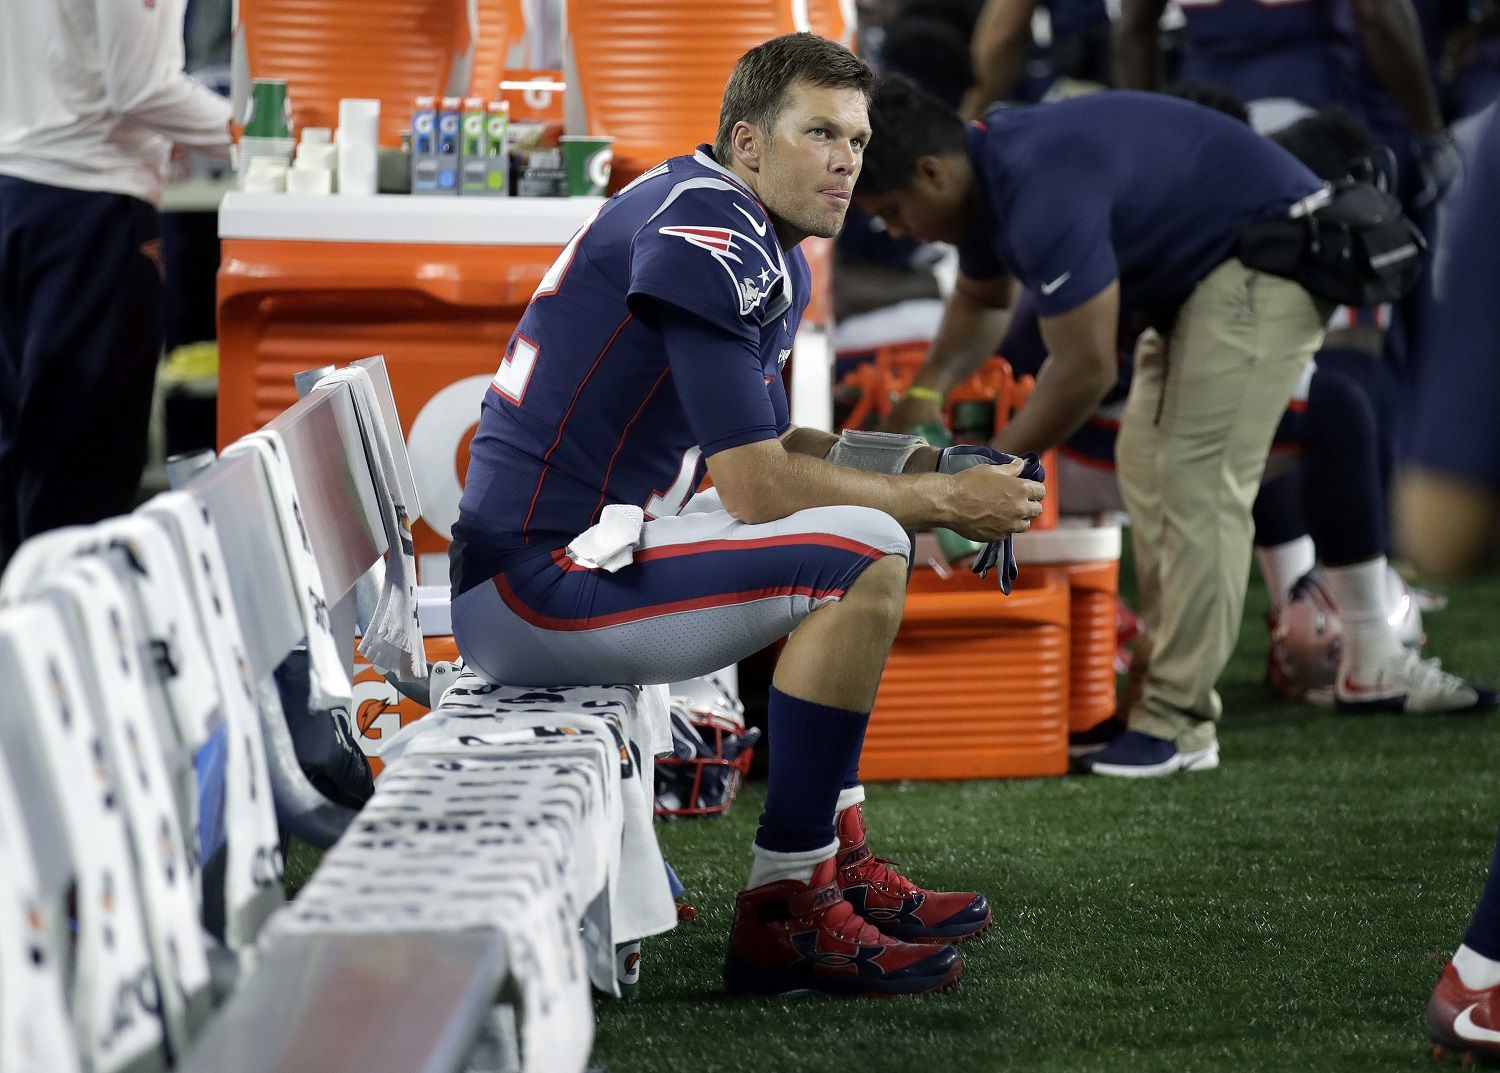 New England Patriots quarterback Tom Brady watches from the sideline during the first half of a preseason NFL football game against the Washington Redskins, Thursday, Aug. 9, 2018, in Foxborough, Mass. (AP Photo/Charles Krupa)